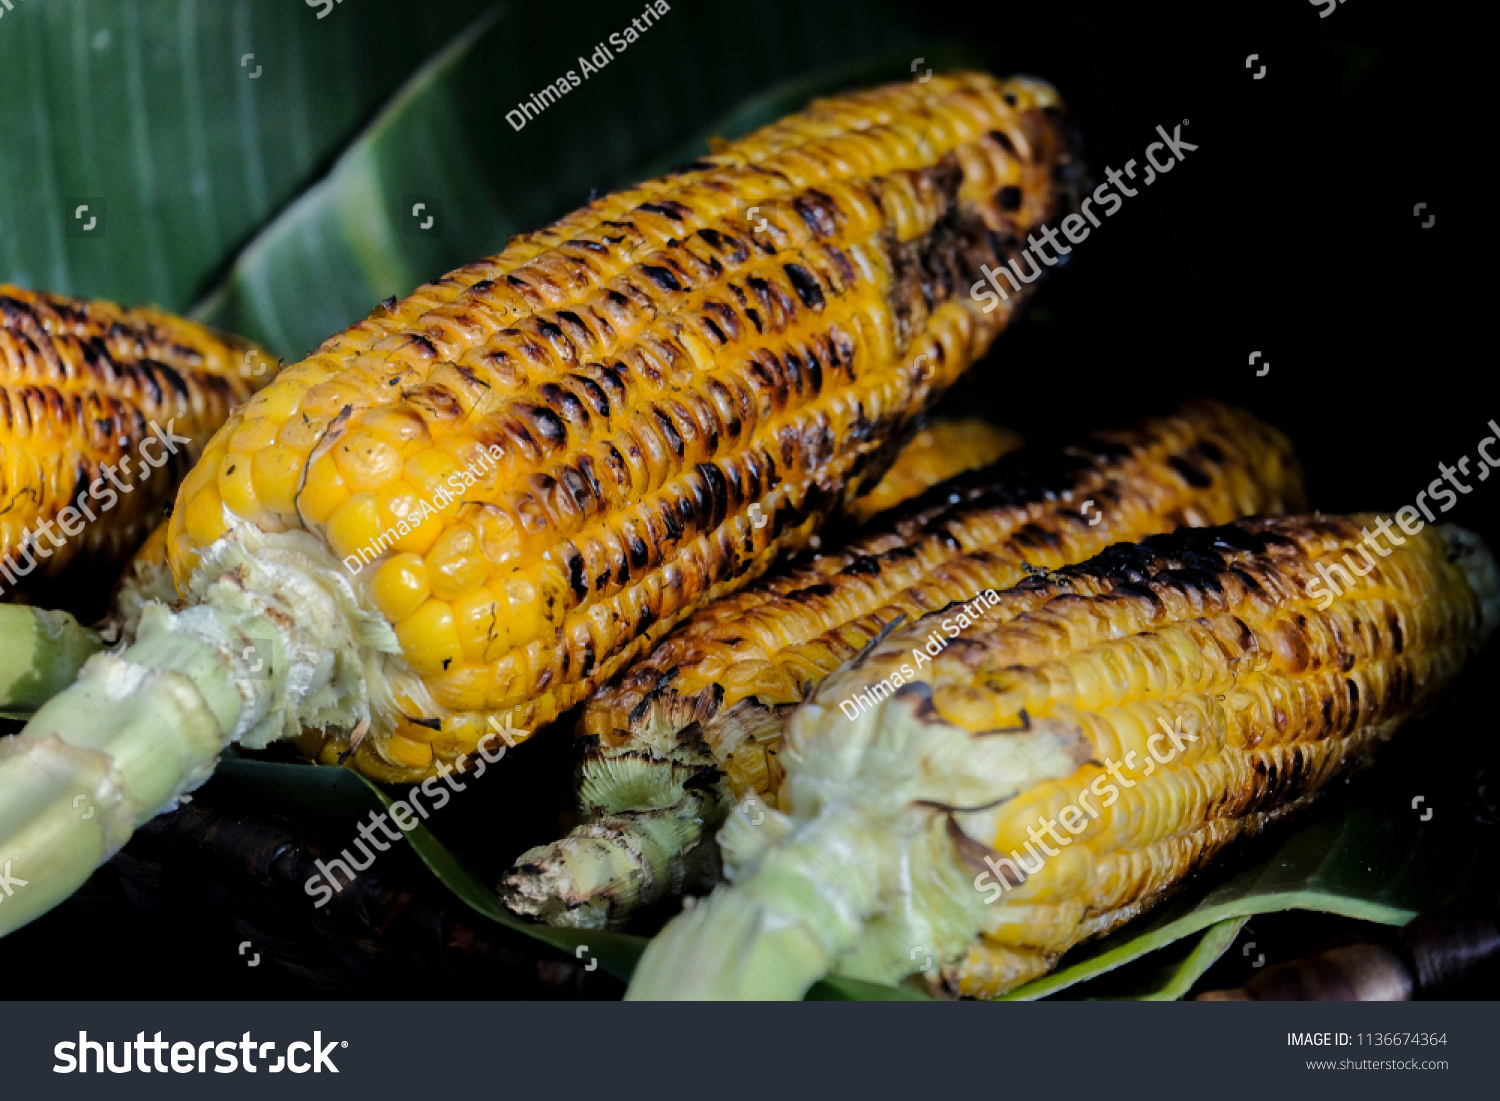 The roased corn in the process of ripening #1136674364